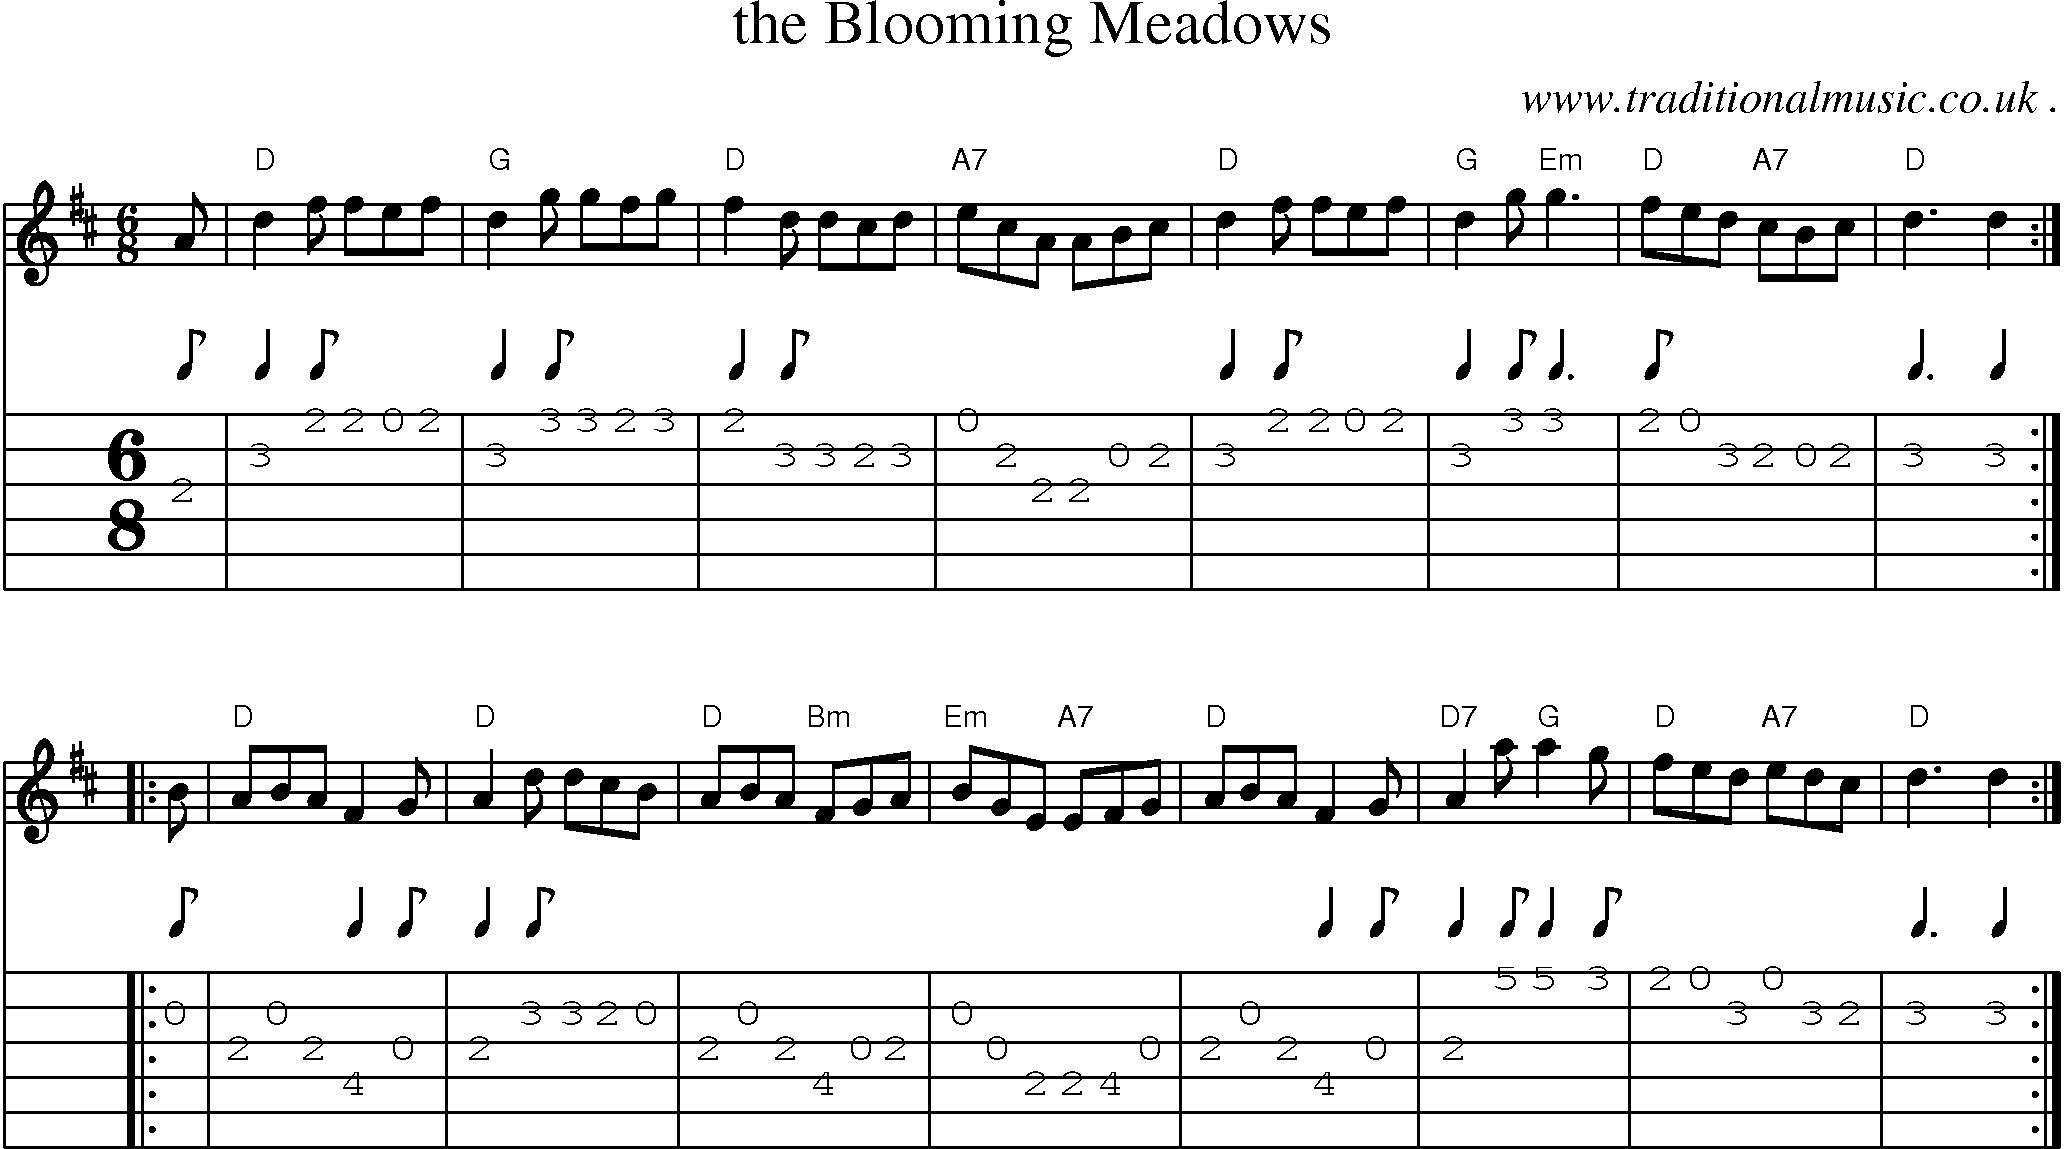 Sheet-music  score, Chords and Guitar Tabs for The Blooming Meadows